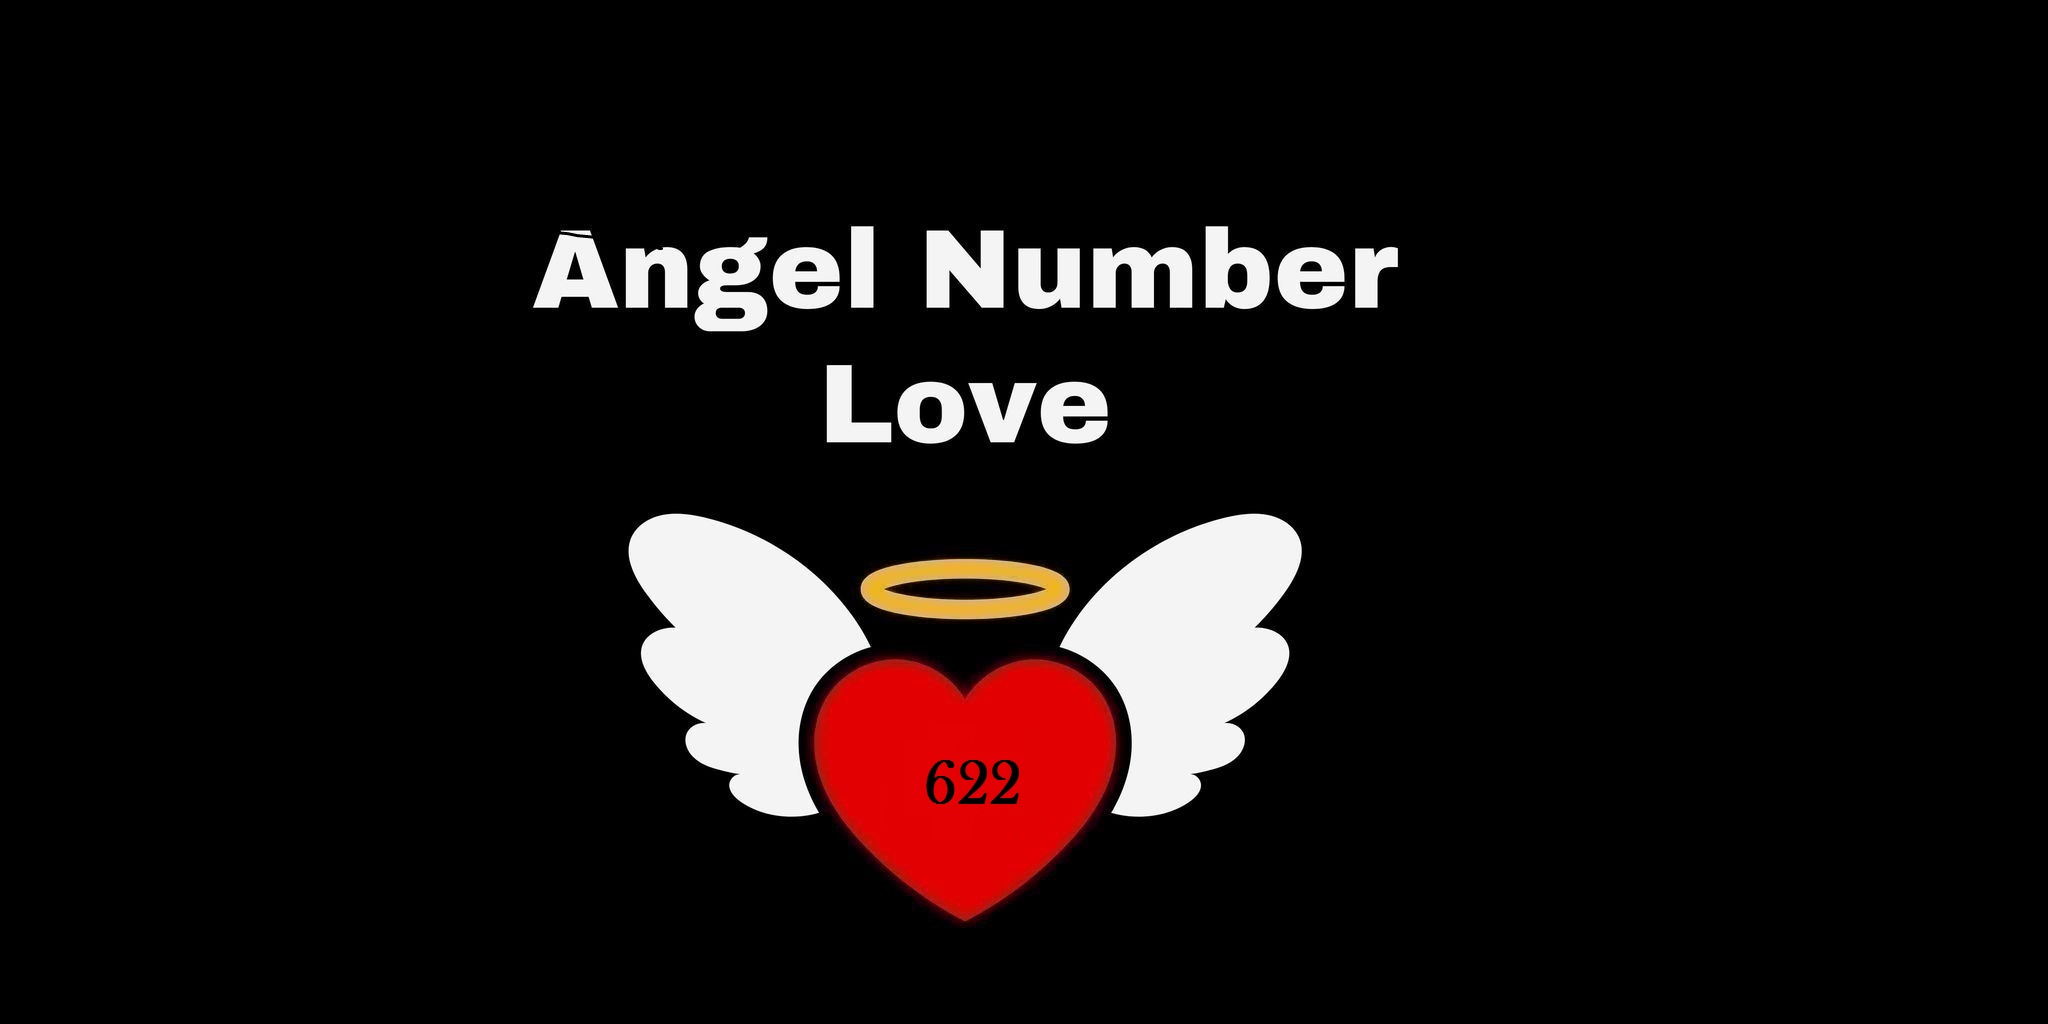 622 Angel Number Meaning In Love